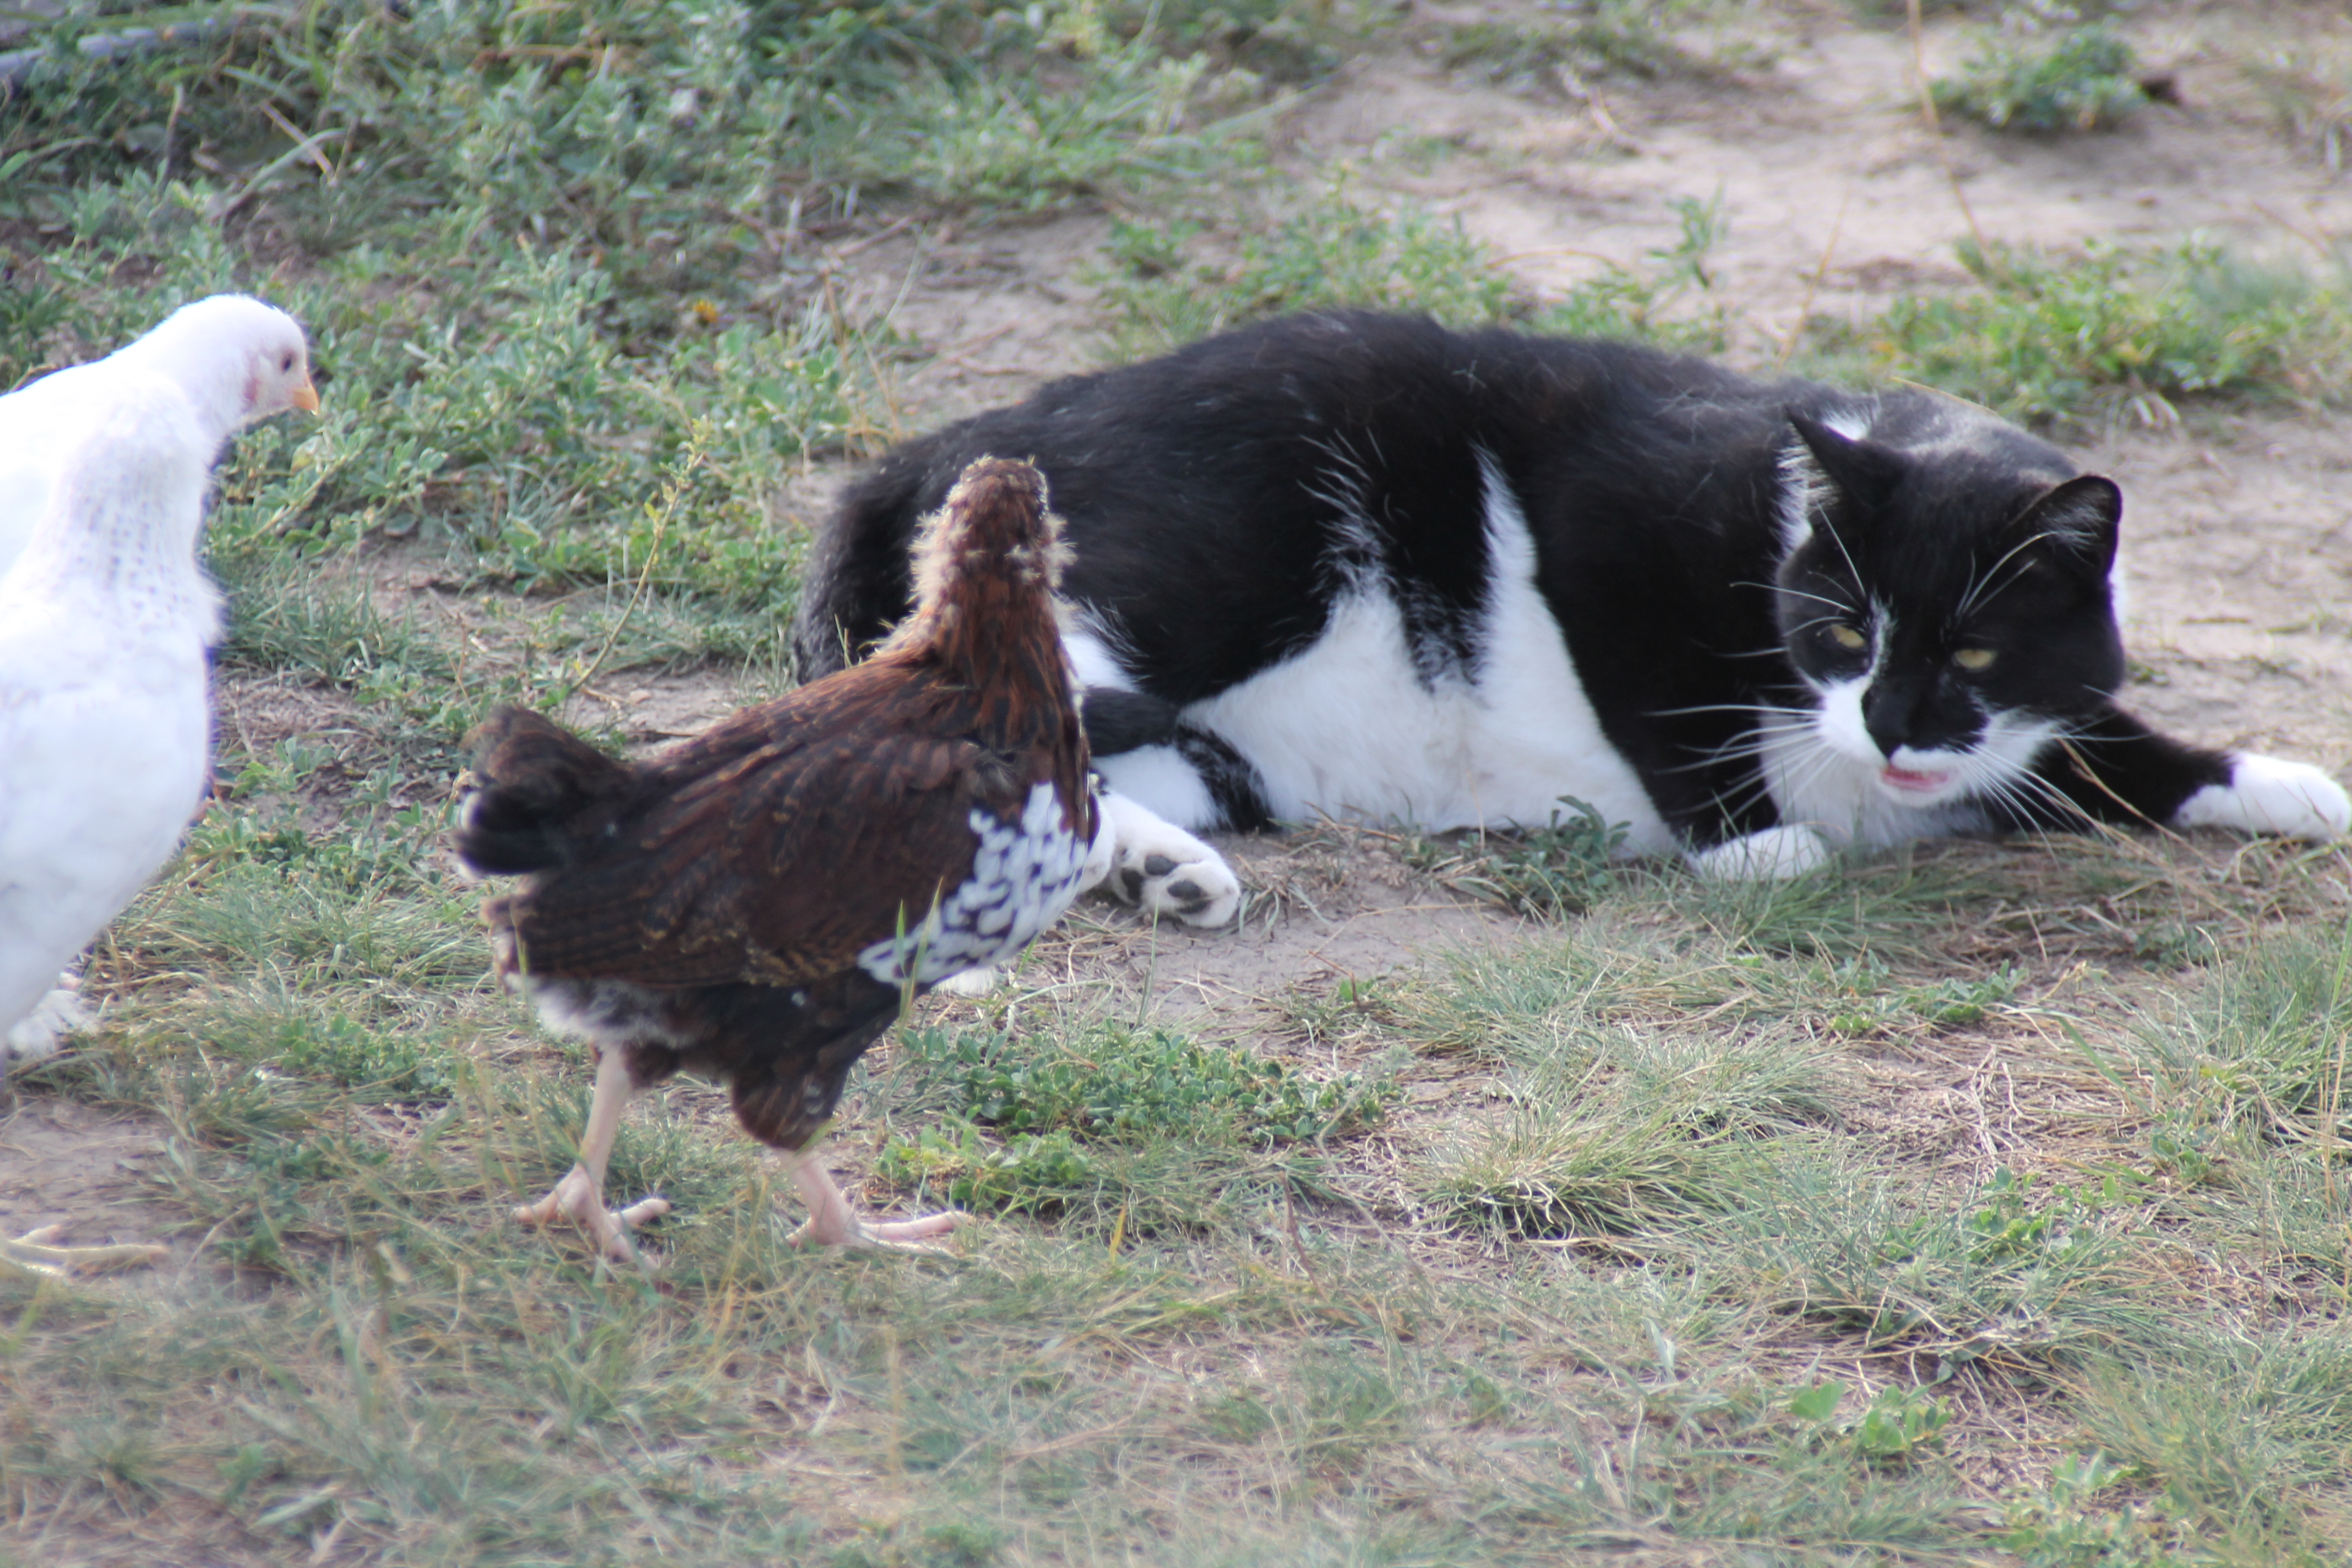 Chicks think cats are might big chickens!